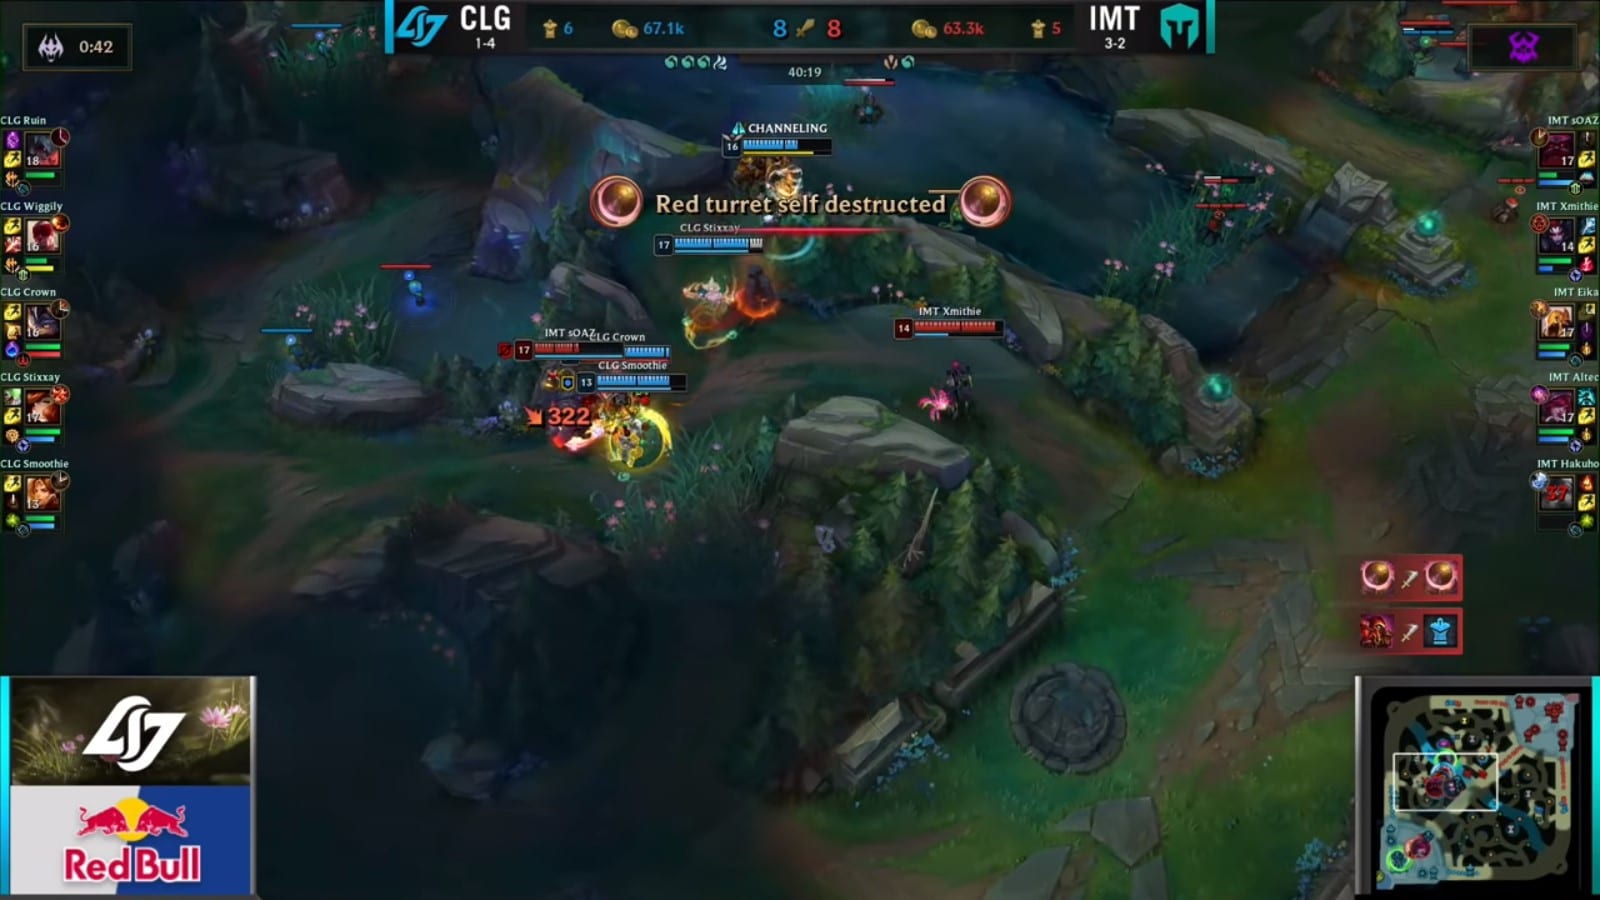 Eika Teleports mid, while sOAZ and Xmithie prevent CLG from basing. 